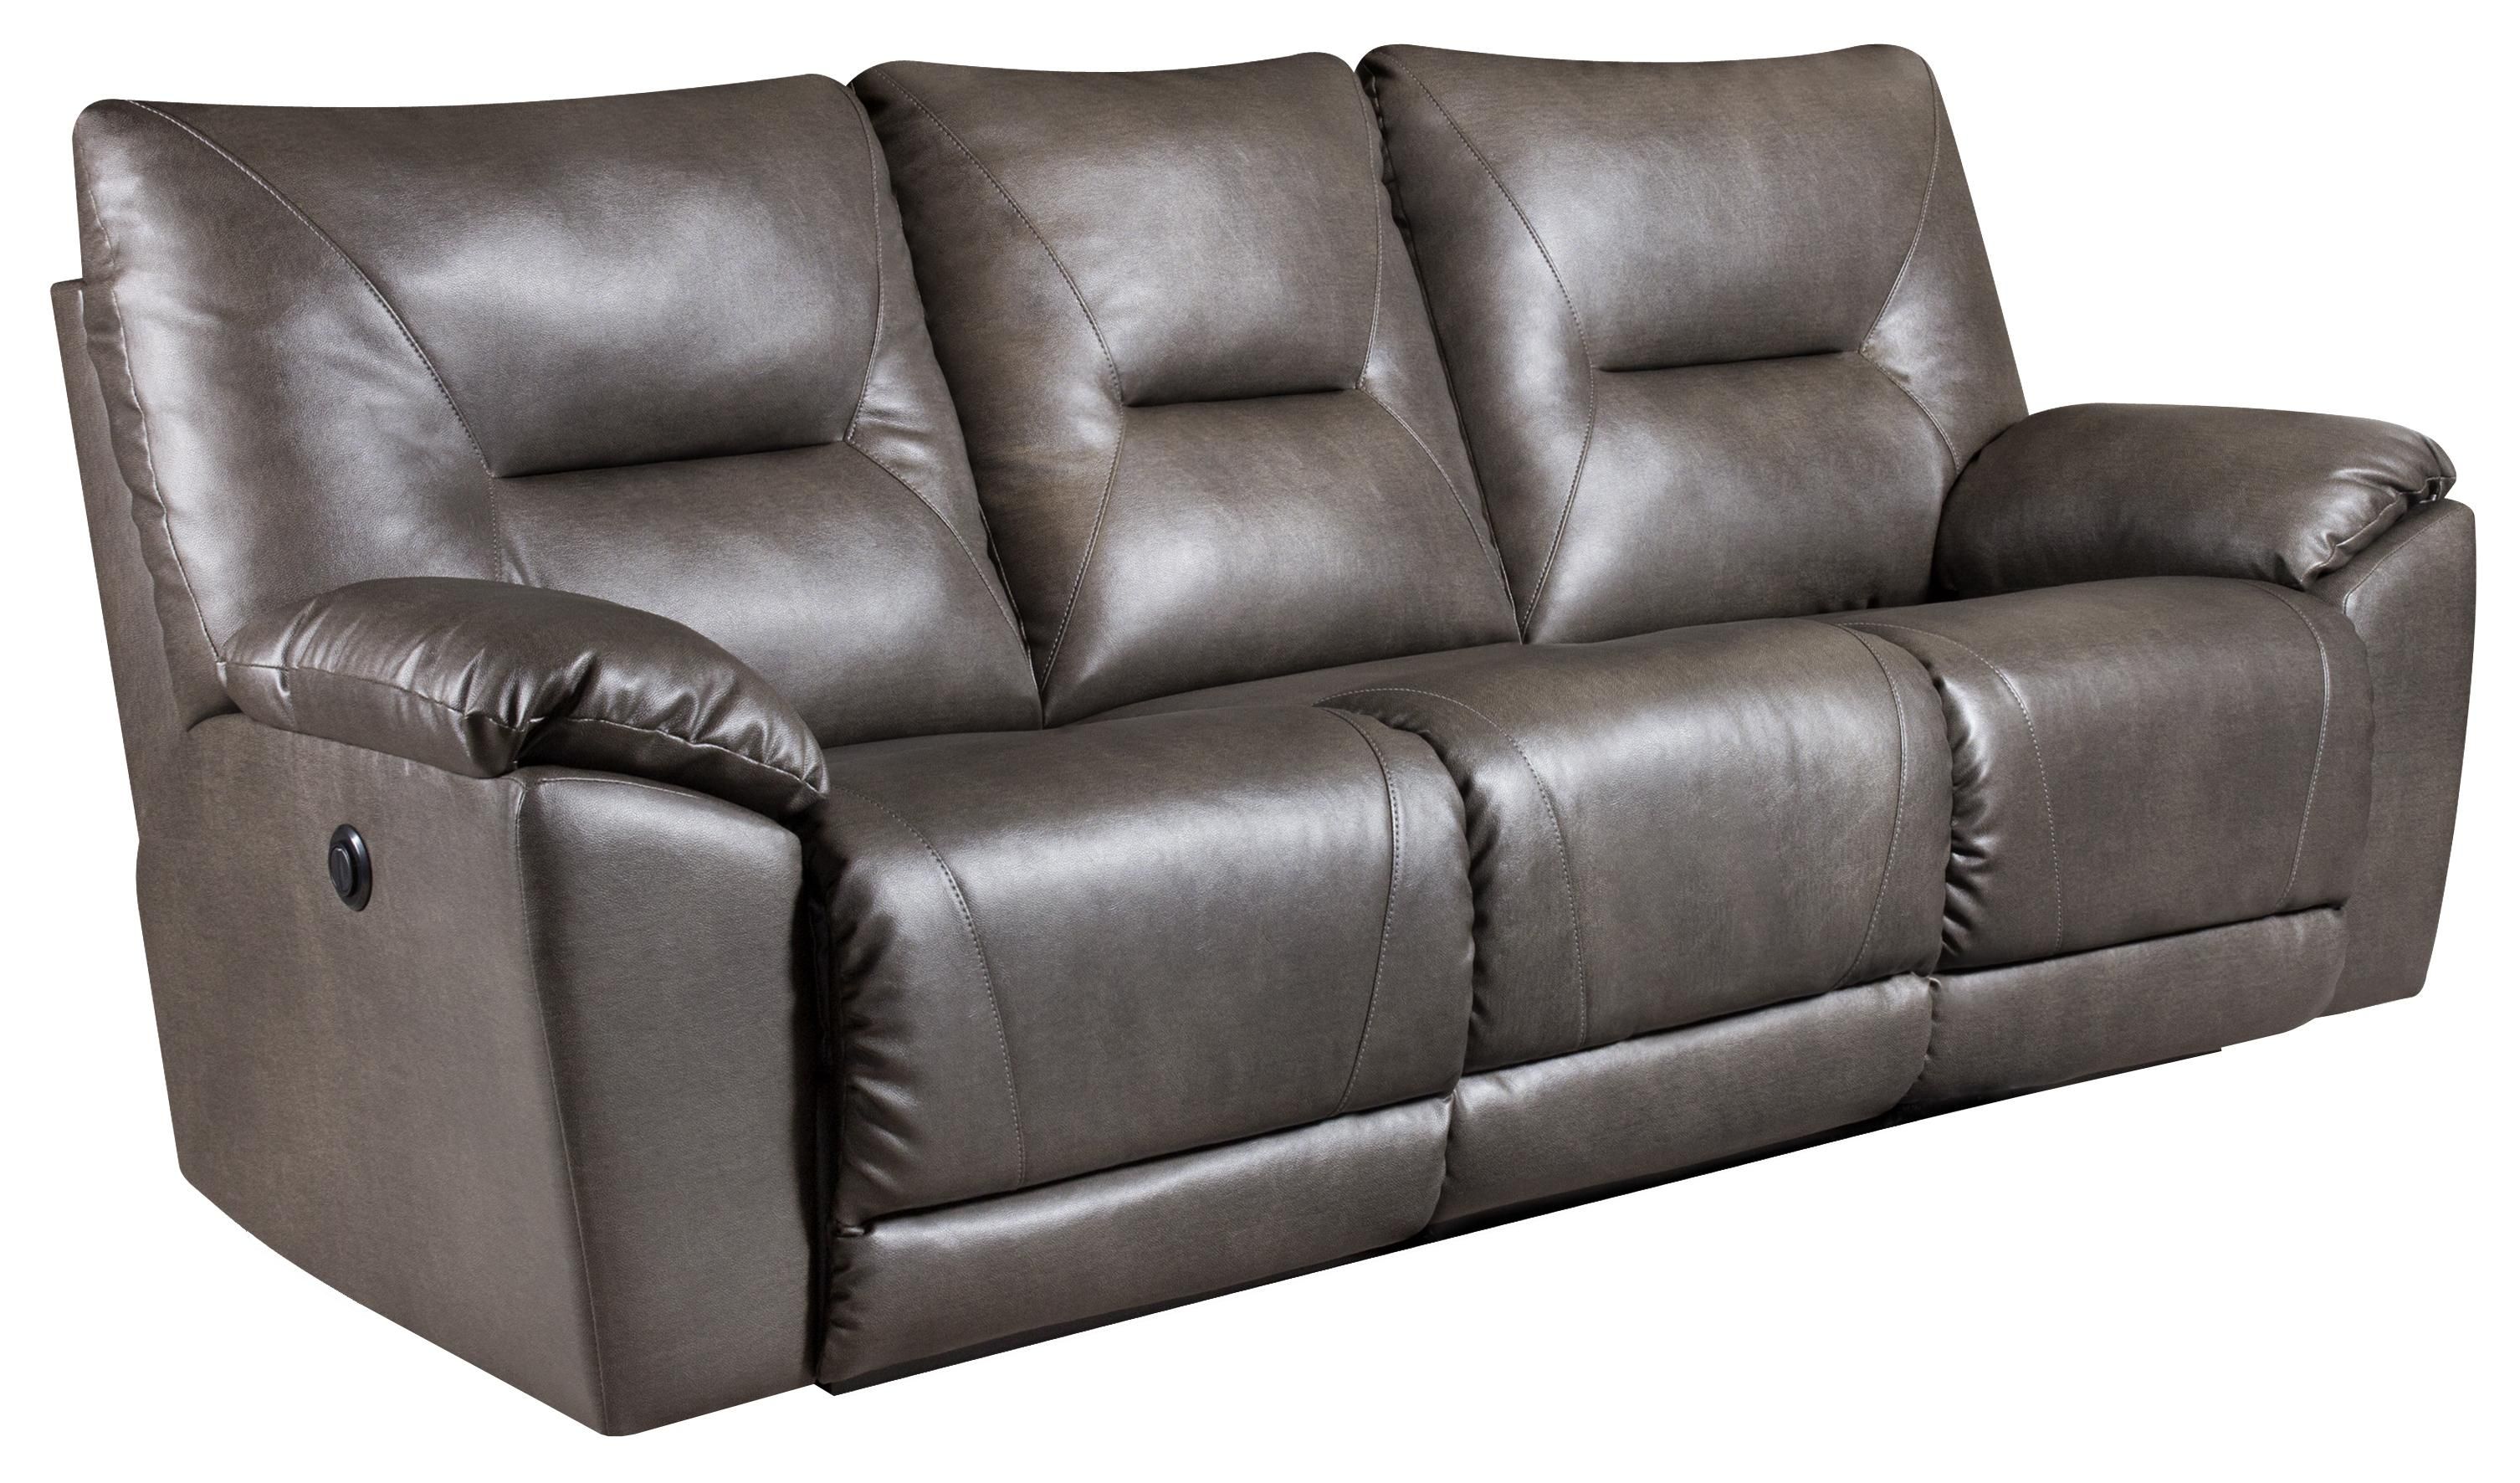 Southern Motion Dynamo Power Double Reclining Sofa For Family Regarding Recliner Sofa Chairs (View 15 of 15)